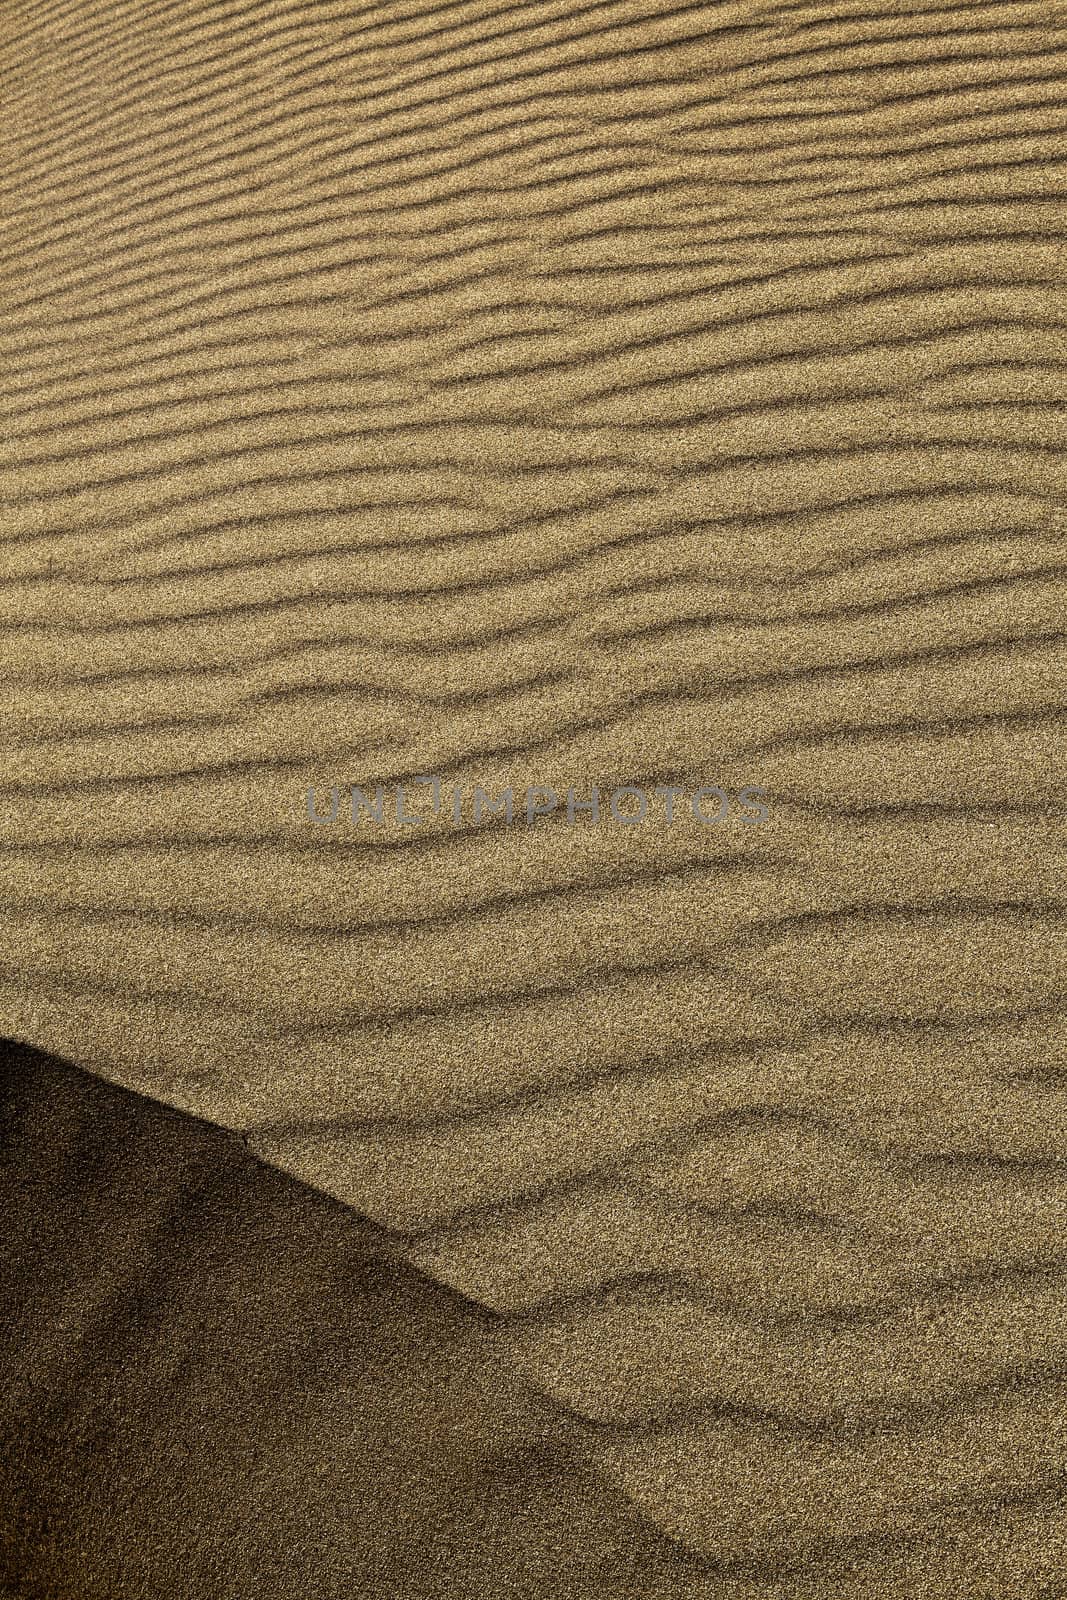 Abstract image showing light and shadow areas in sand dune detail